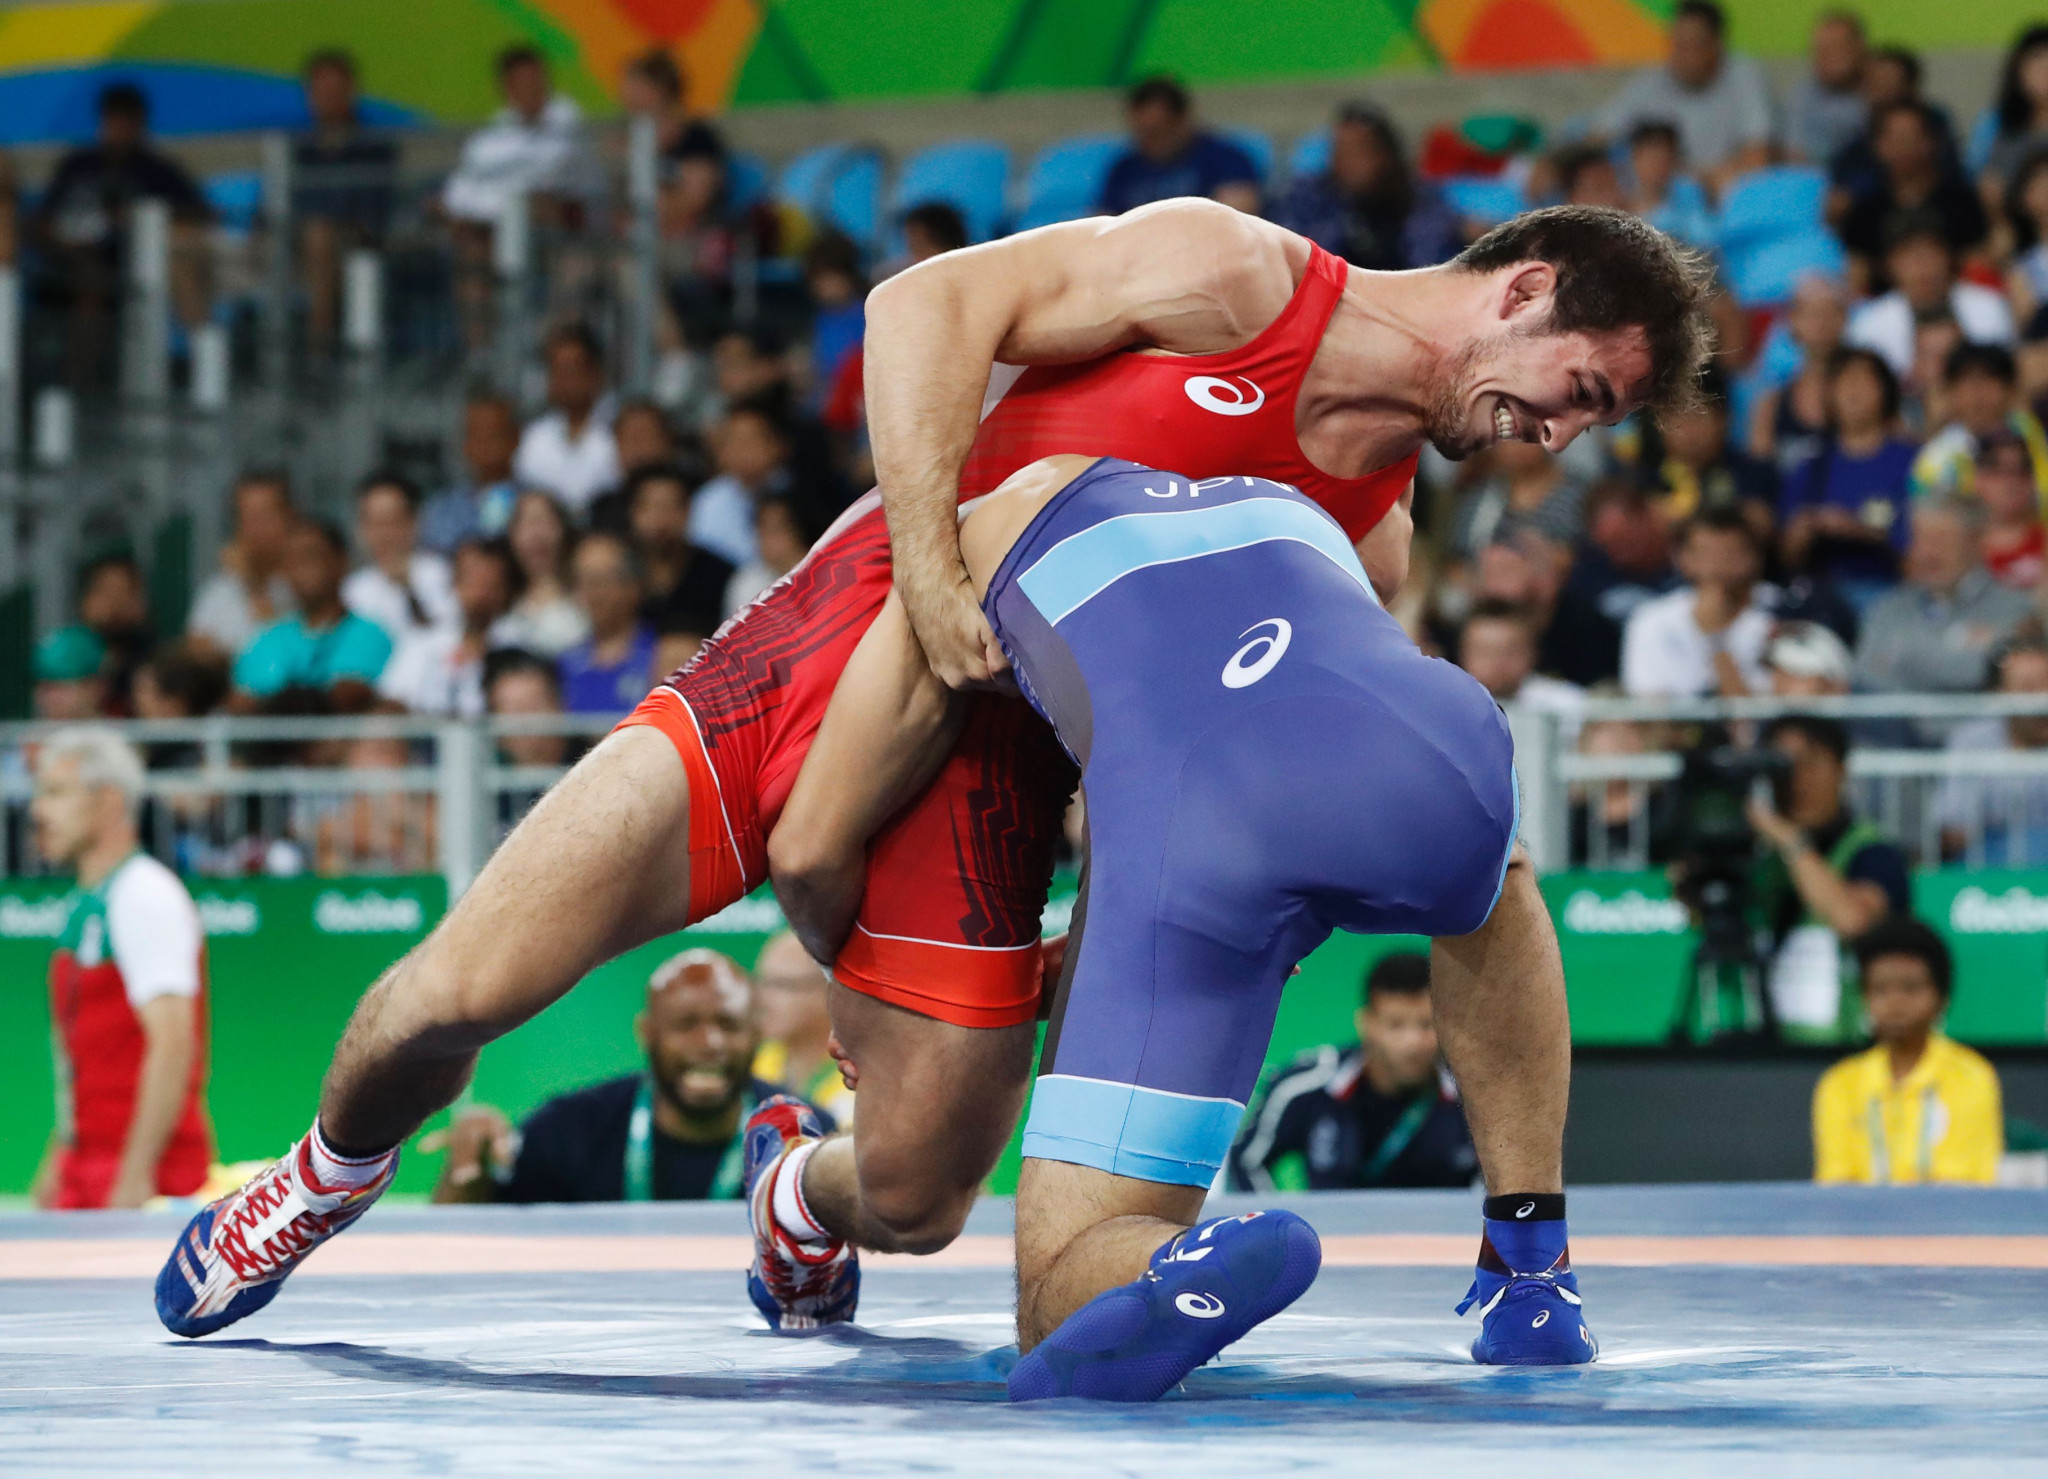 France's Zelimkhan Khadjiev, in red, is one of three wrestlers to have lost their place at Tokyo 2020 due to an anti-doping violation ©Getty Images